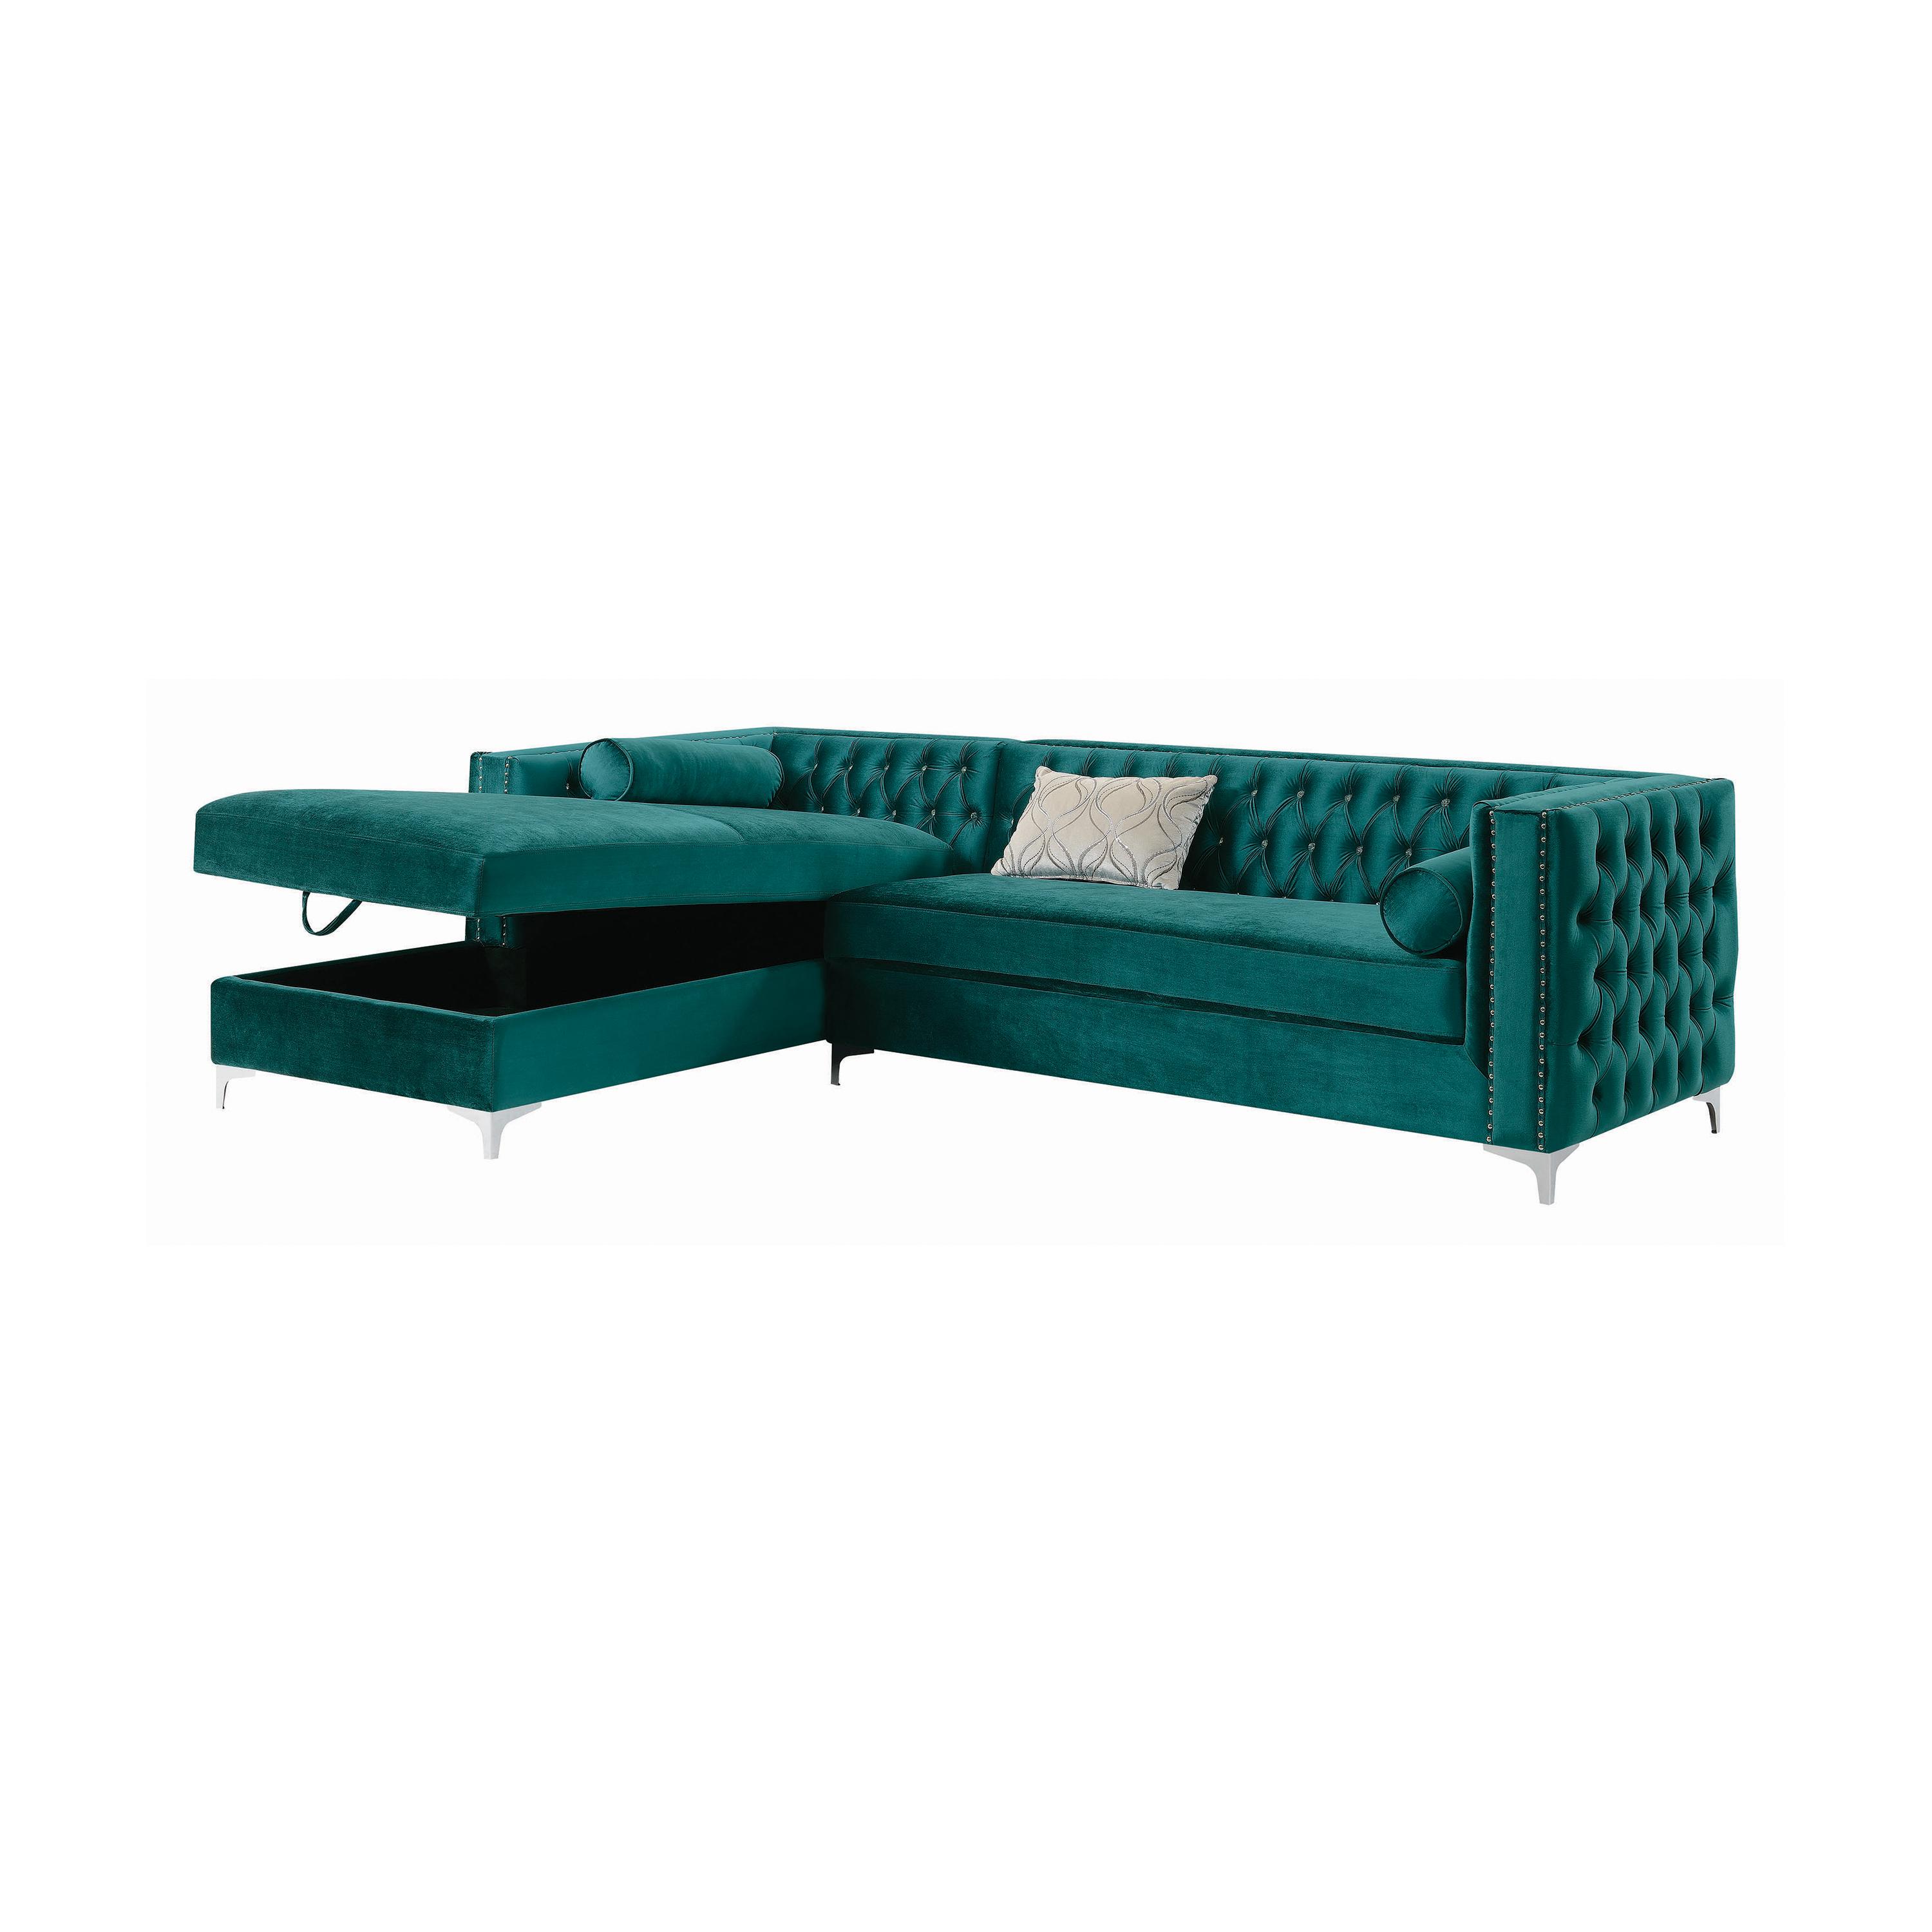 Contemporary Sectional 508380 Bellaire 508380 in Teal Velvet